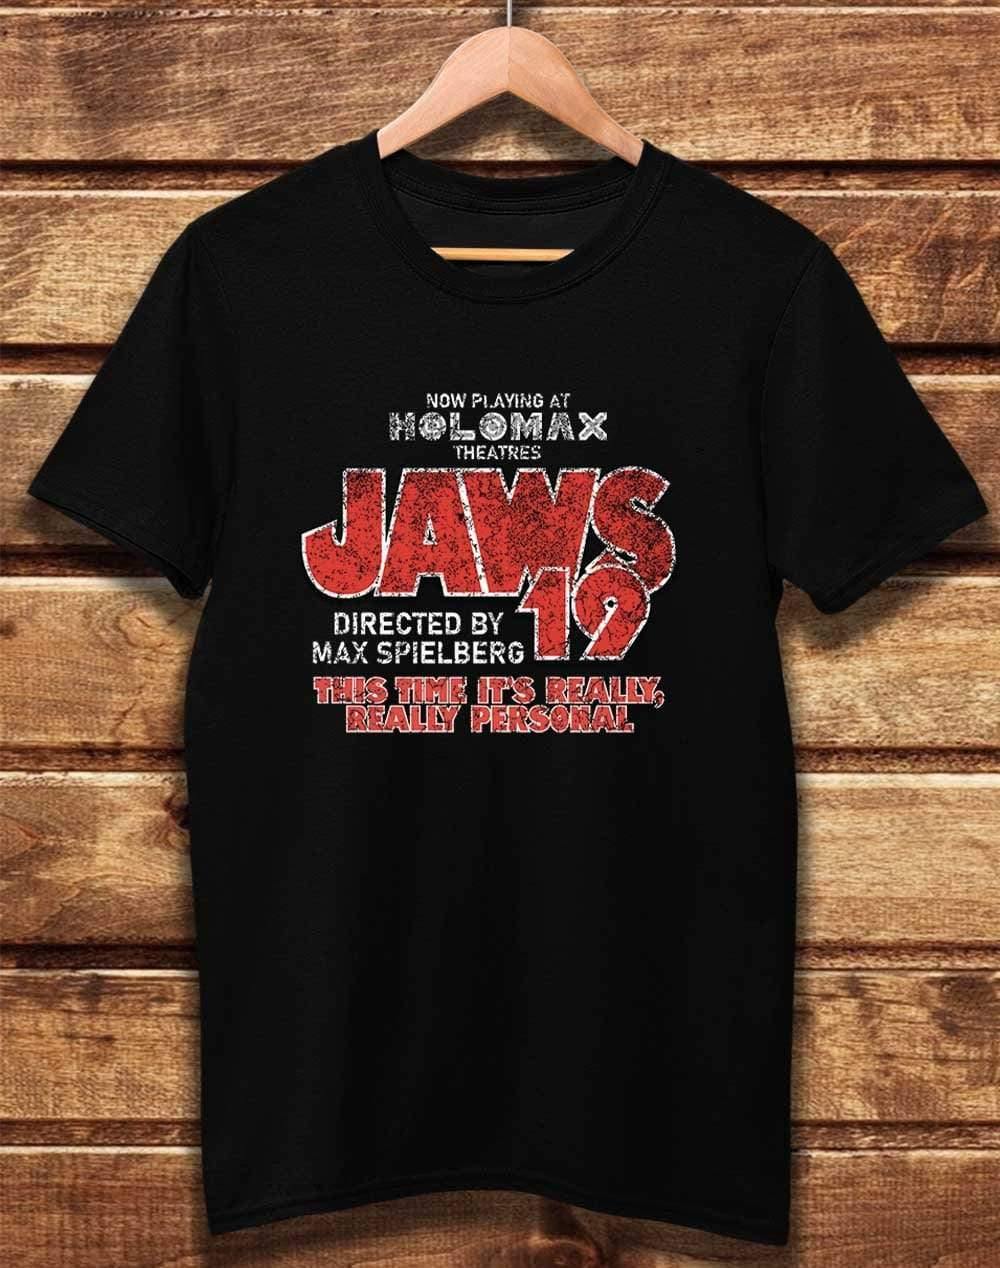 DELUXE Jaws 19 Organic Cotton T-Shirt XS / Black  - Off World Tees